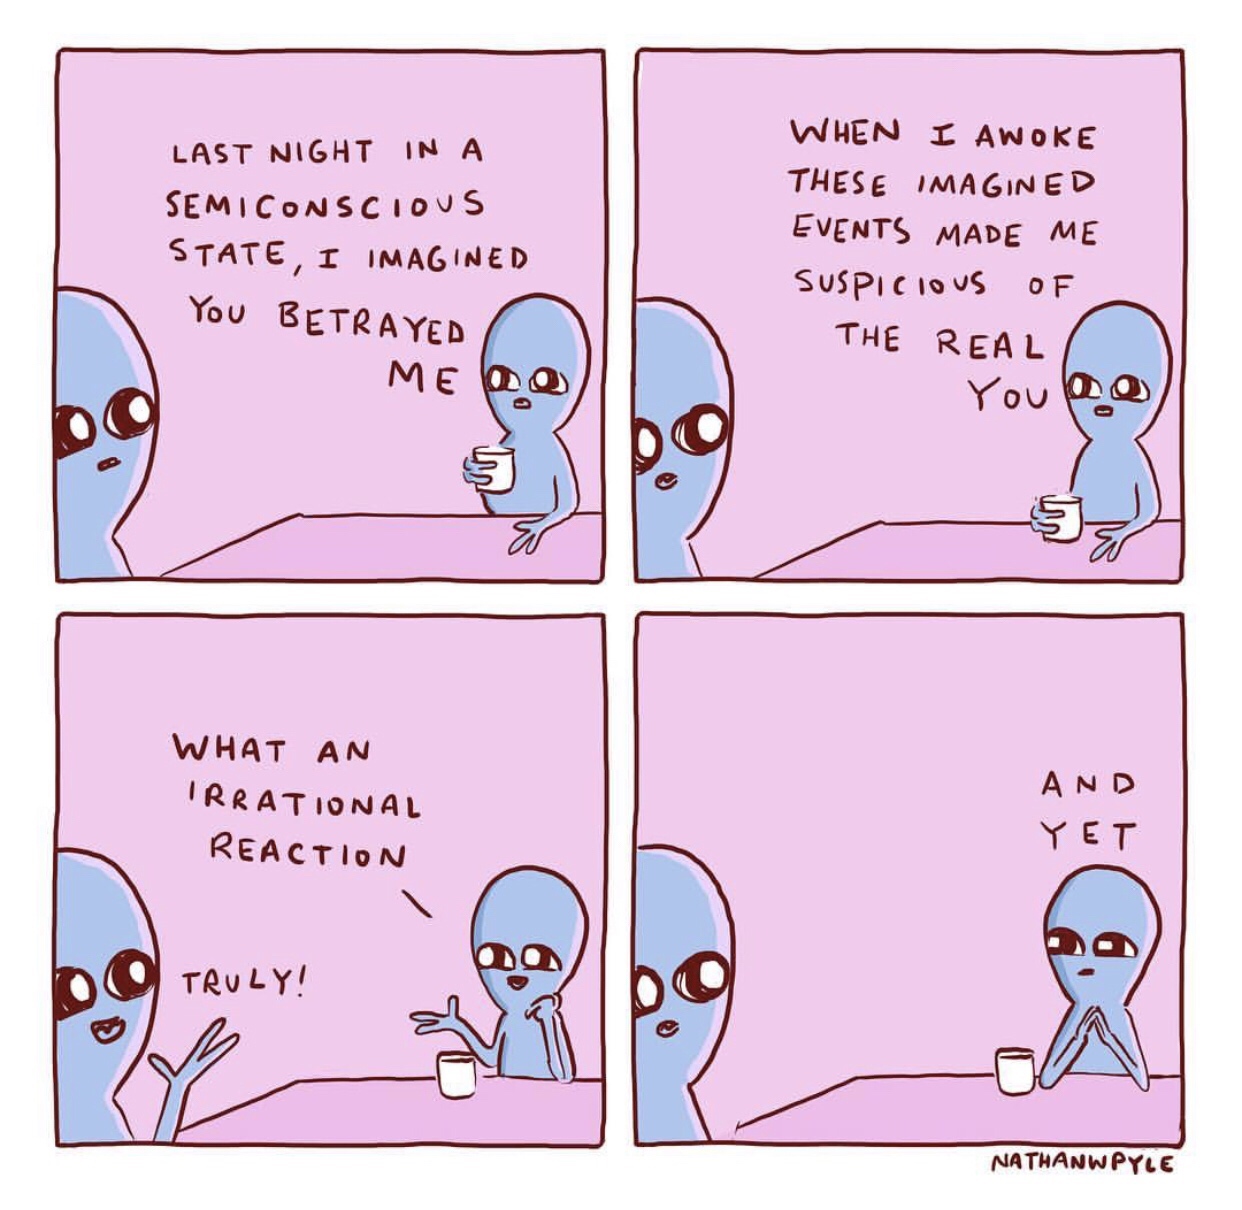 strange planet and yet - Last Night In A Semiconscious State, I Imagined You Betrayed When I Awoke These Imagined Events Made Me Suspicious Of The Real You What An Irrational Reaction And Yet Truly! Nathanwpyle